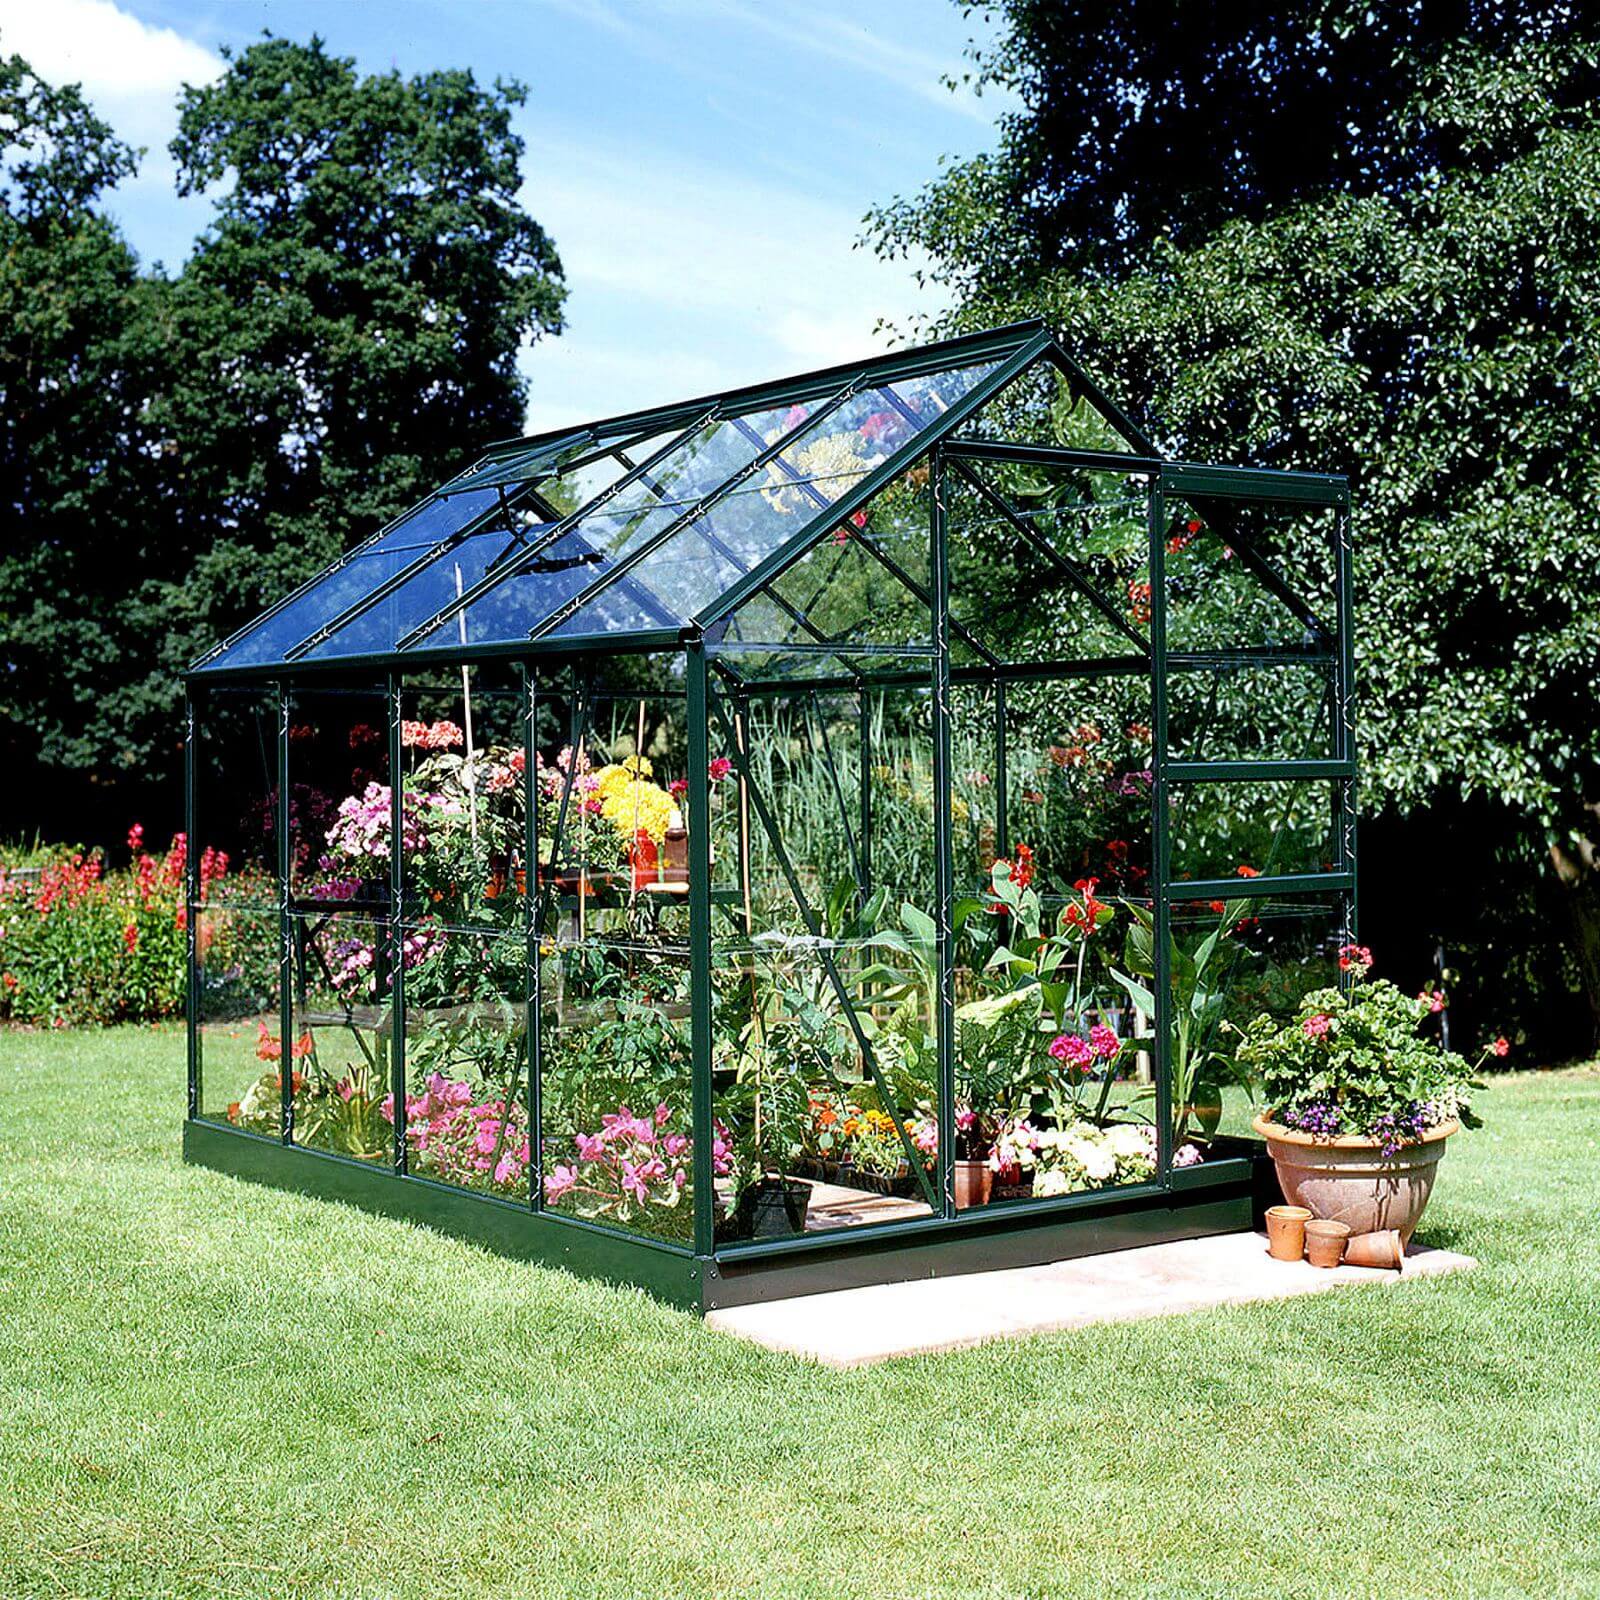 Halls 8 x 6ft Aluminium Popular Green Greenhouse with Horticultural Glass & Base